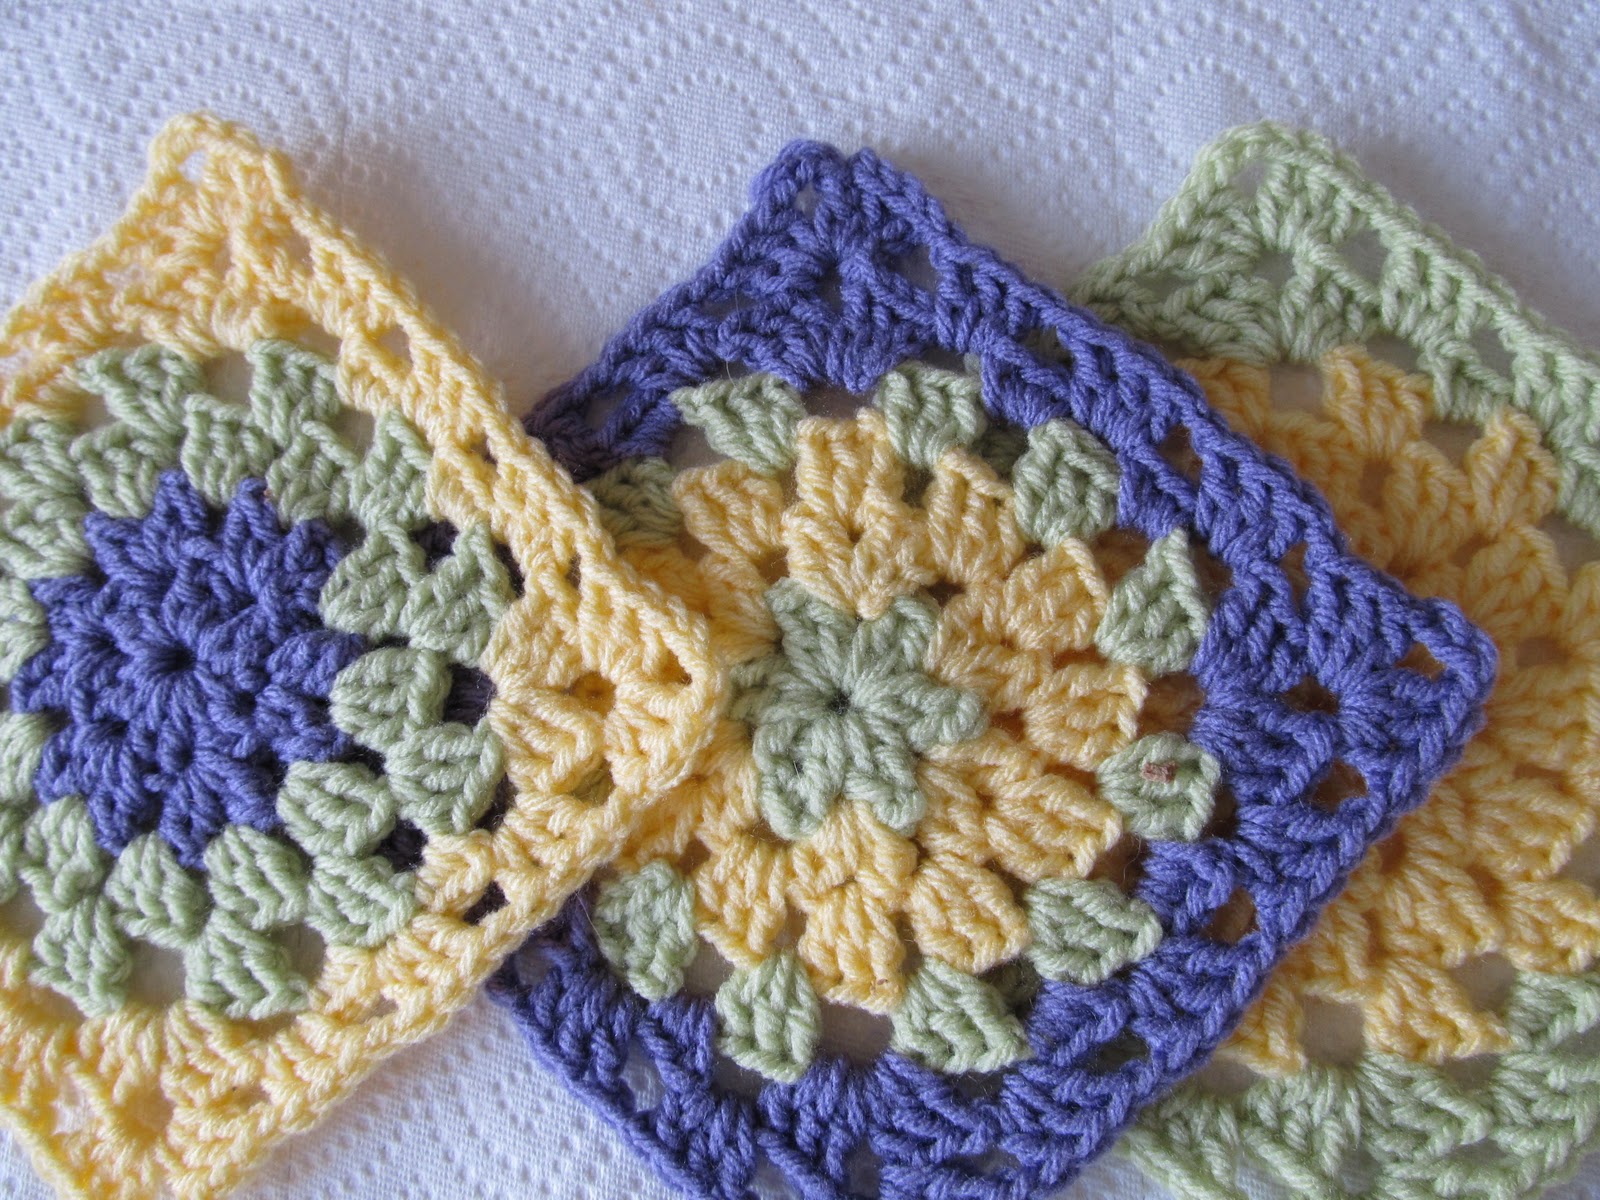 Experiences With Crocheting for Charity - Crochet Enthusiasts